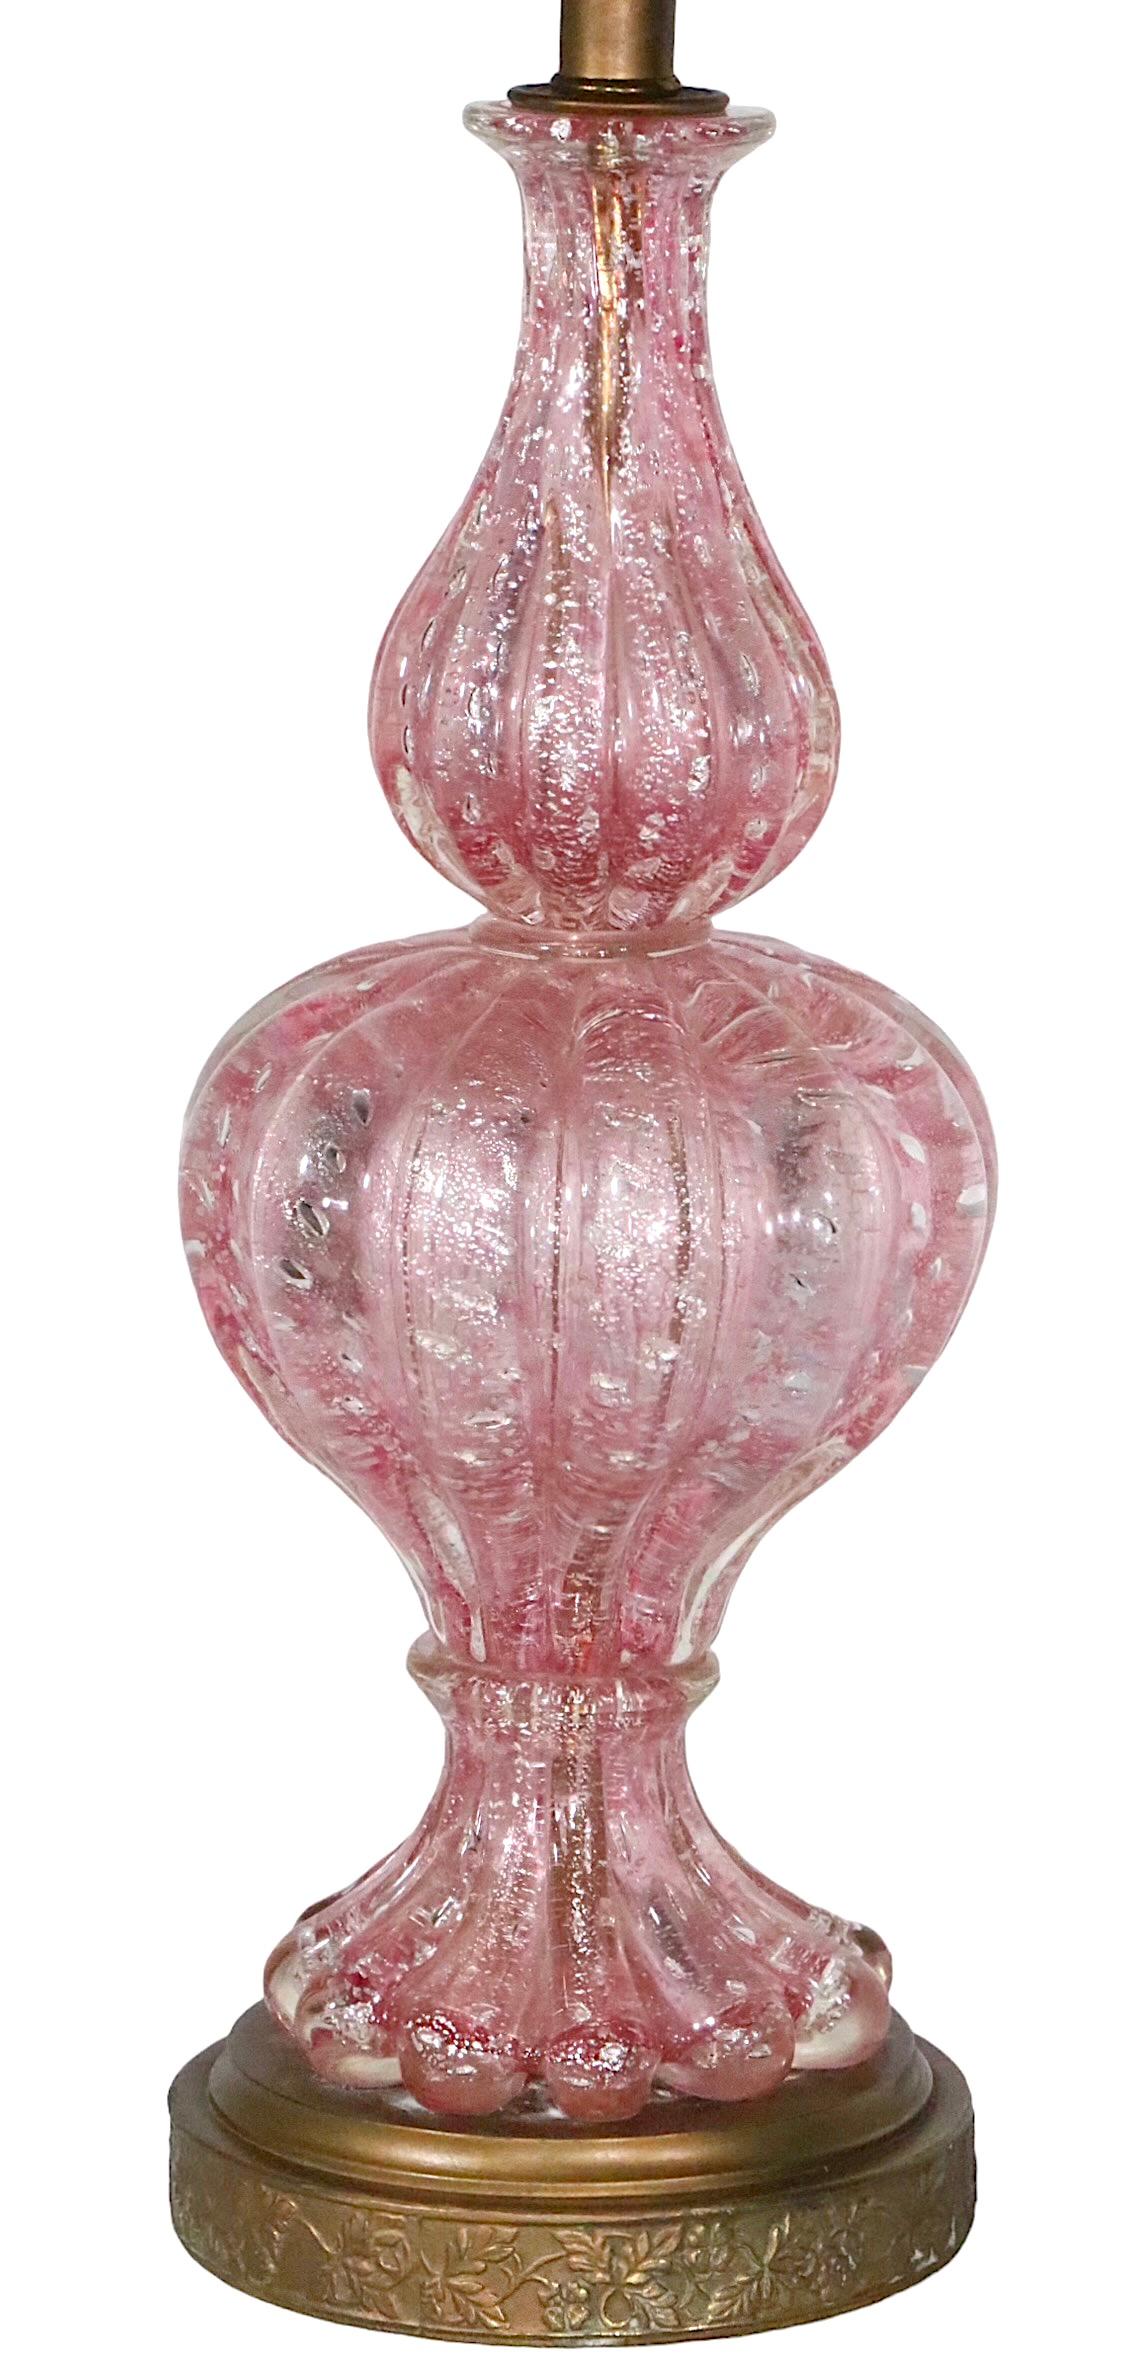 Pr. Murano Art Glass Table Lamps Made in Italy  att.  to  Barovier c. 1950’s  For Sale 7